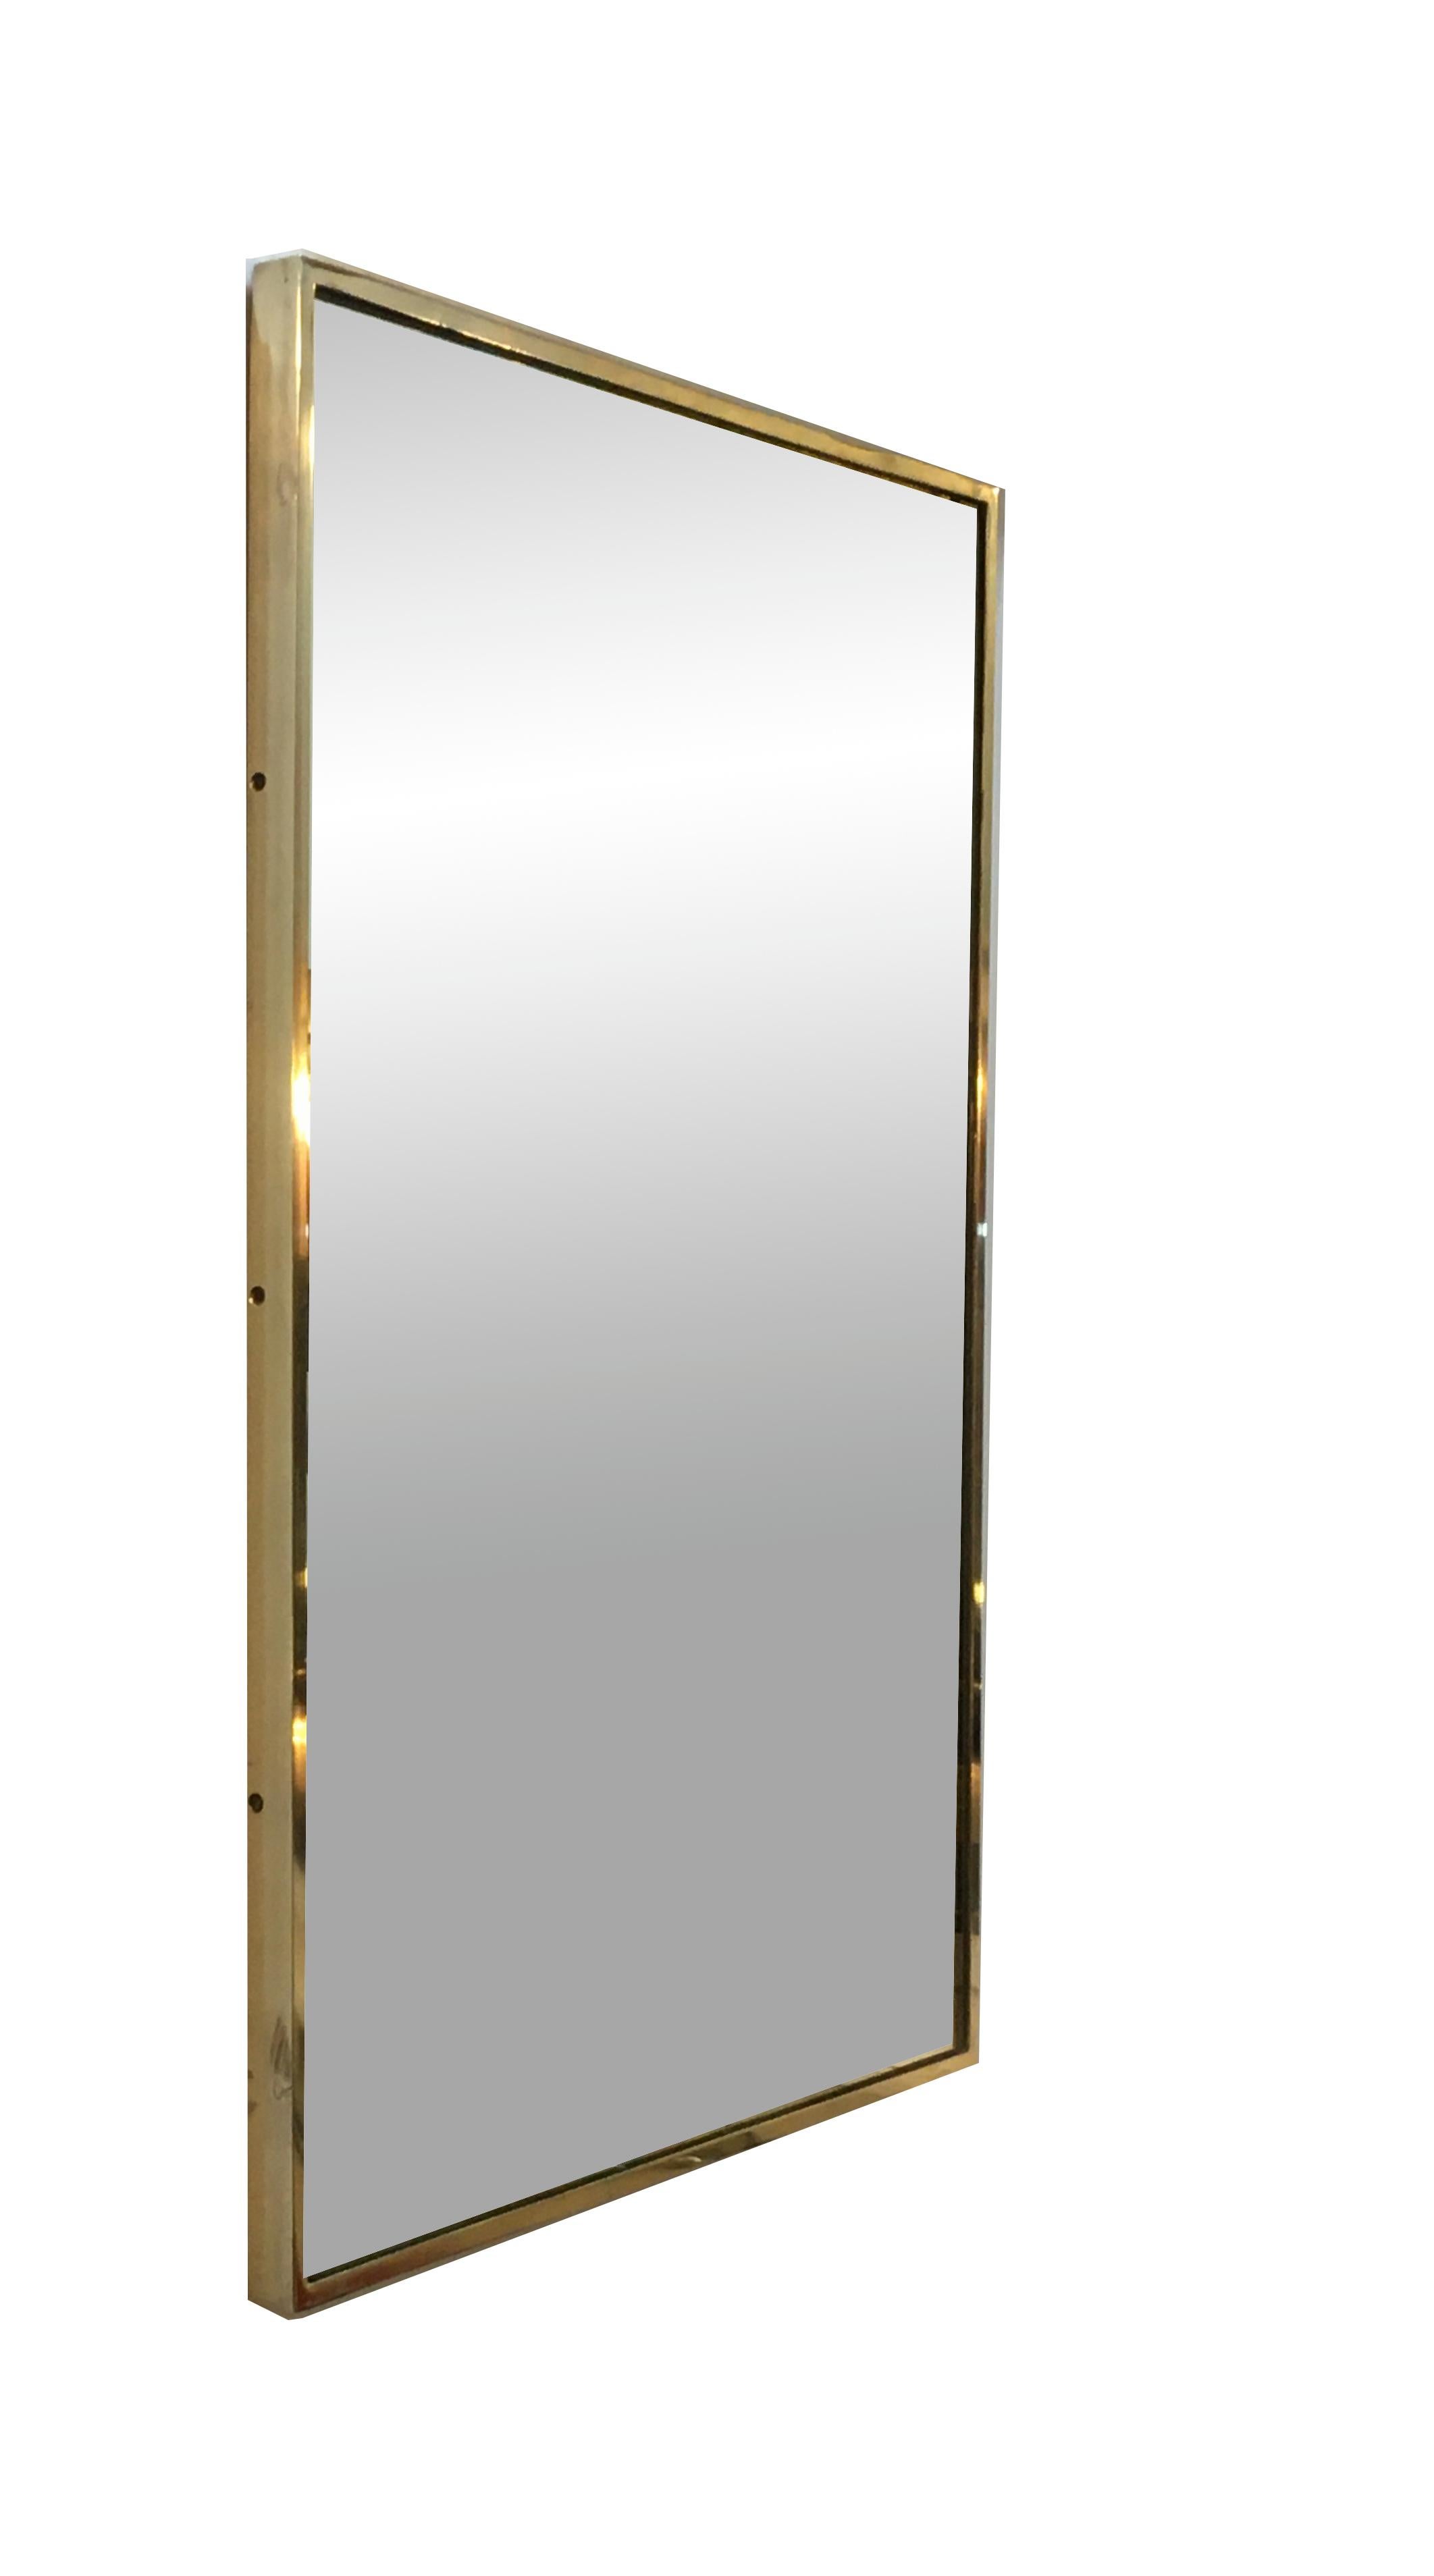 Italian rectangular wall mirror with brass frame on wooden base. A simple and elegant design in good vintage condition.
 this piece is stylistically related to the designer Gio Ponti, Romeo Rega